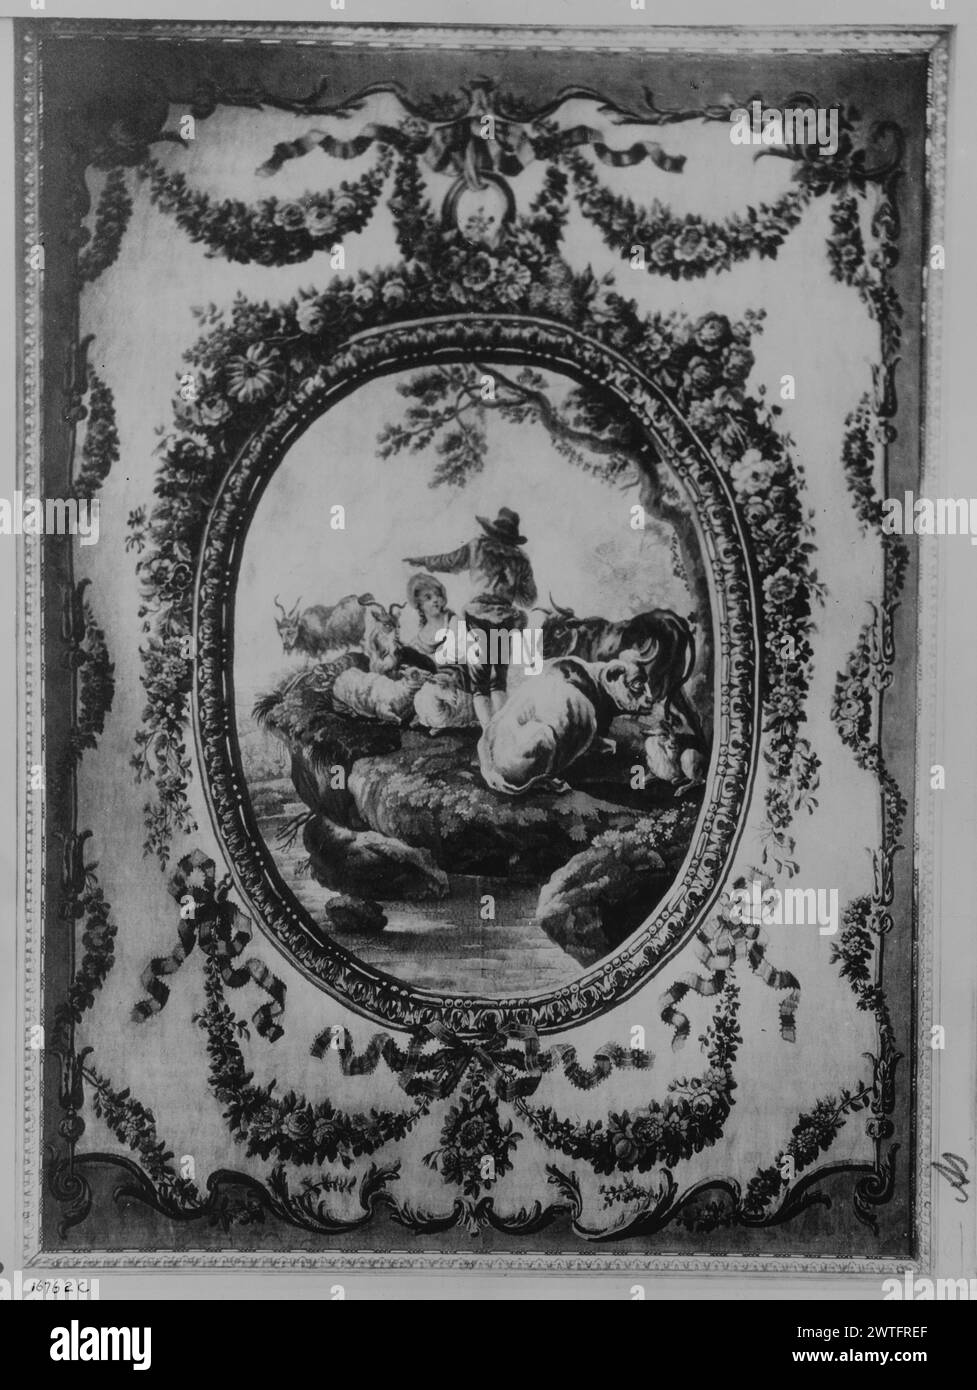 Rural couple with flocks and herd. unknown c. 1770-1790 Tapestry Materials/Techniques: unknown Culture: French Weaving Center: Aubusson Ownership History: French & Co. Suspended medallion with couple (ALENTOUR) arabesque frame with floral garlands & festoons, tied ribbons No French & Co. stock sheet in archive, no stock number Related Works: Panels in set: 0240361, 0240363, 0240365, 0240367 Stock Photo